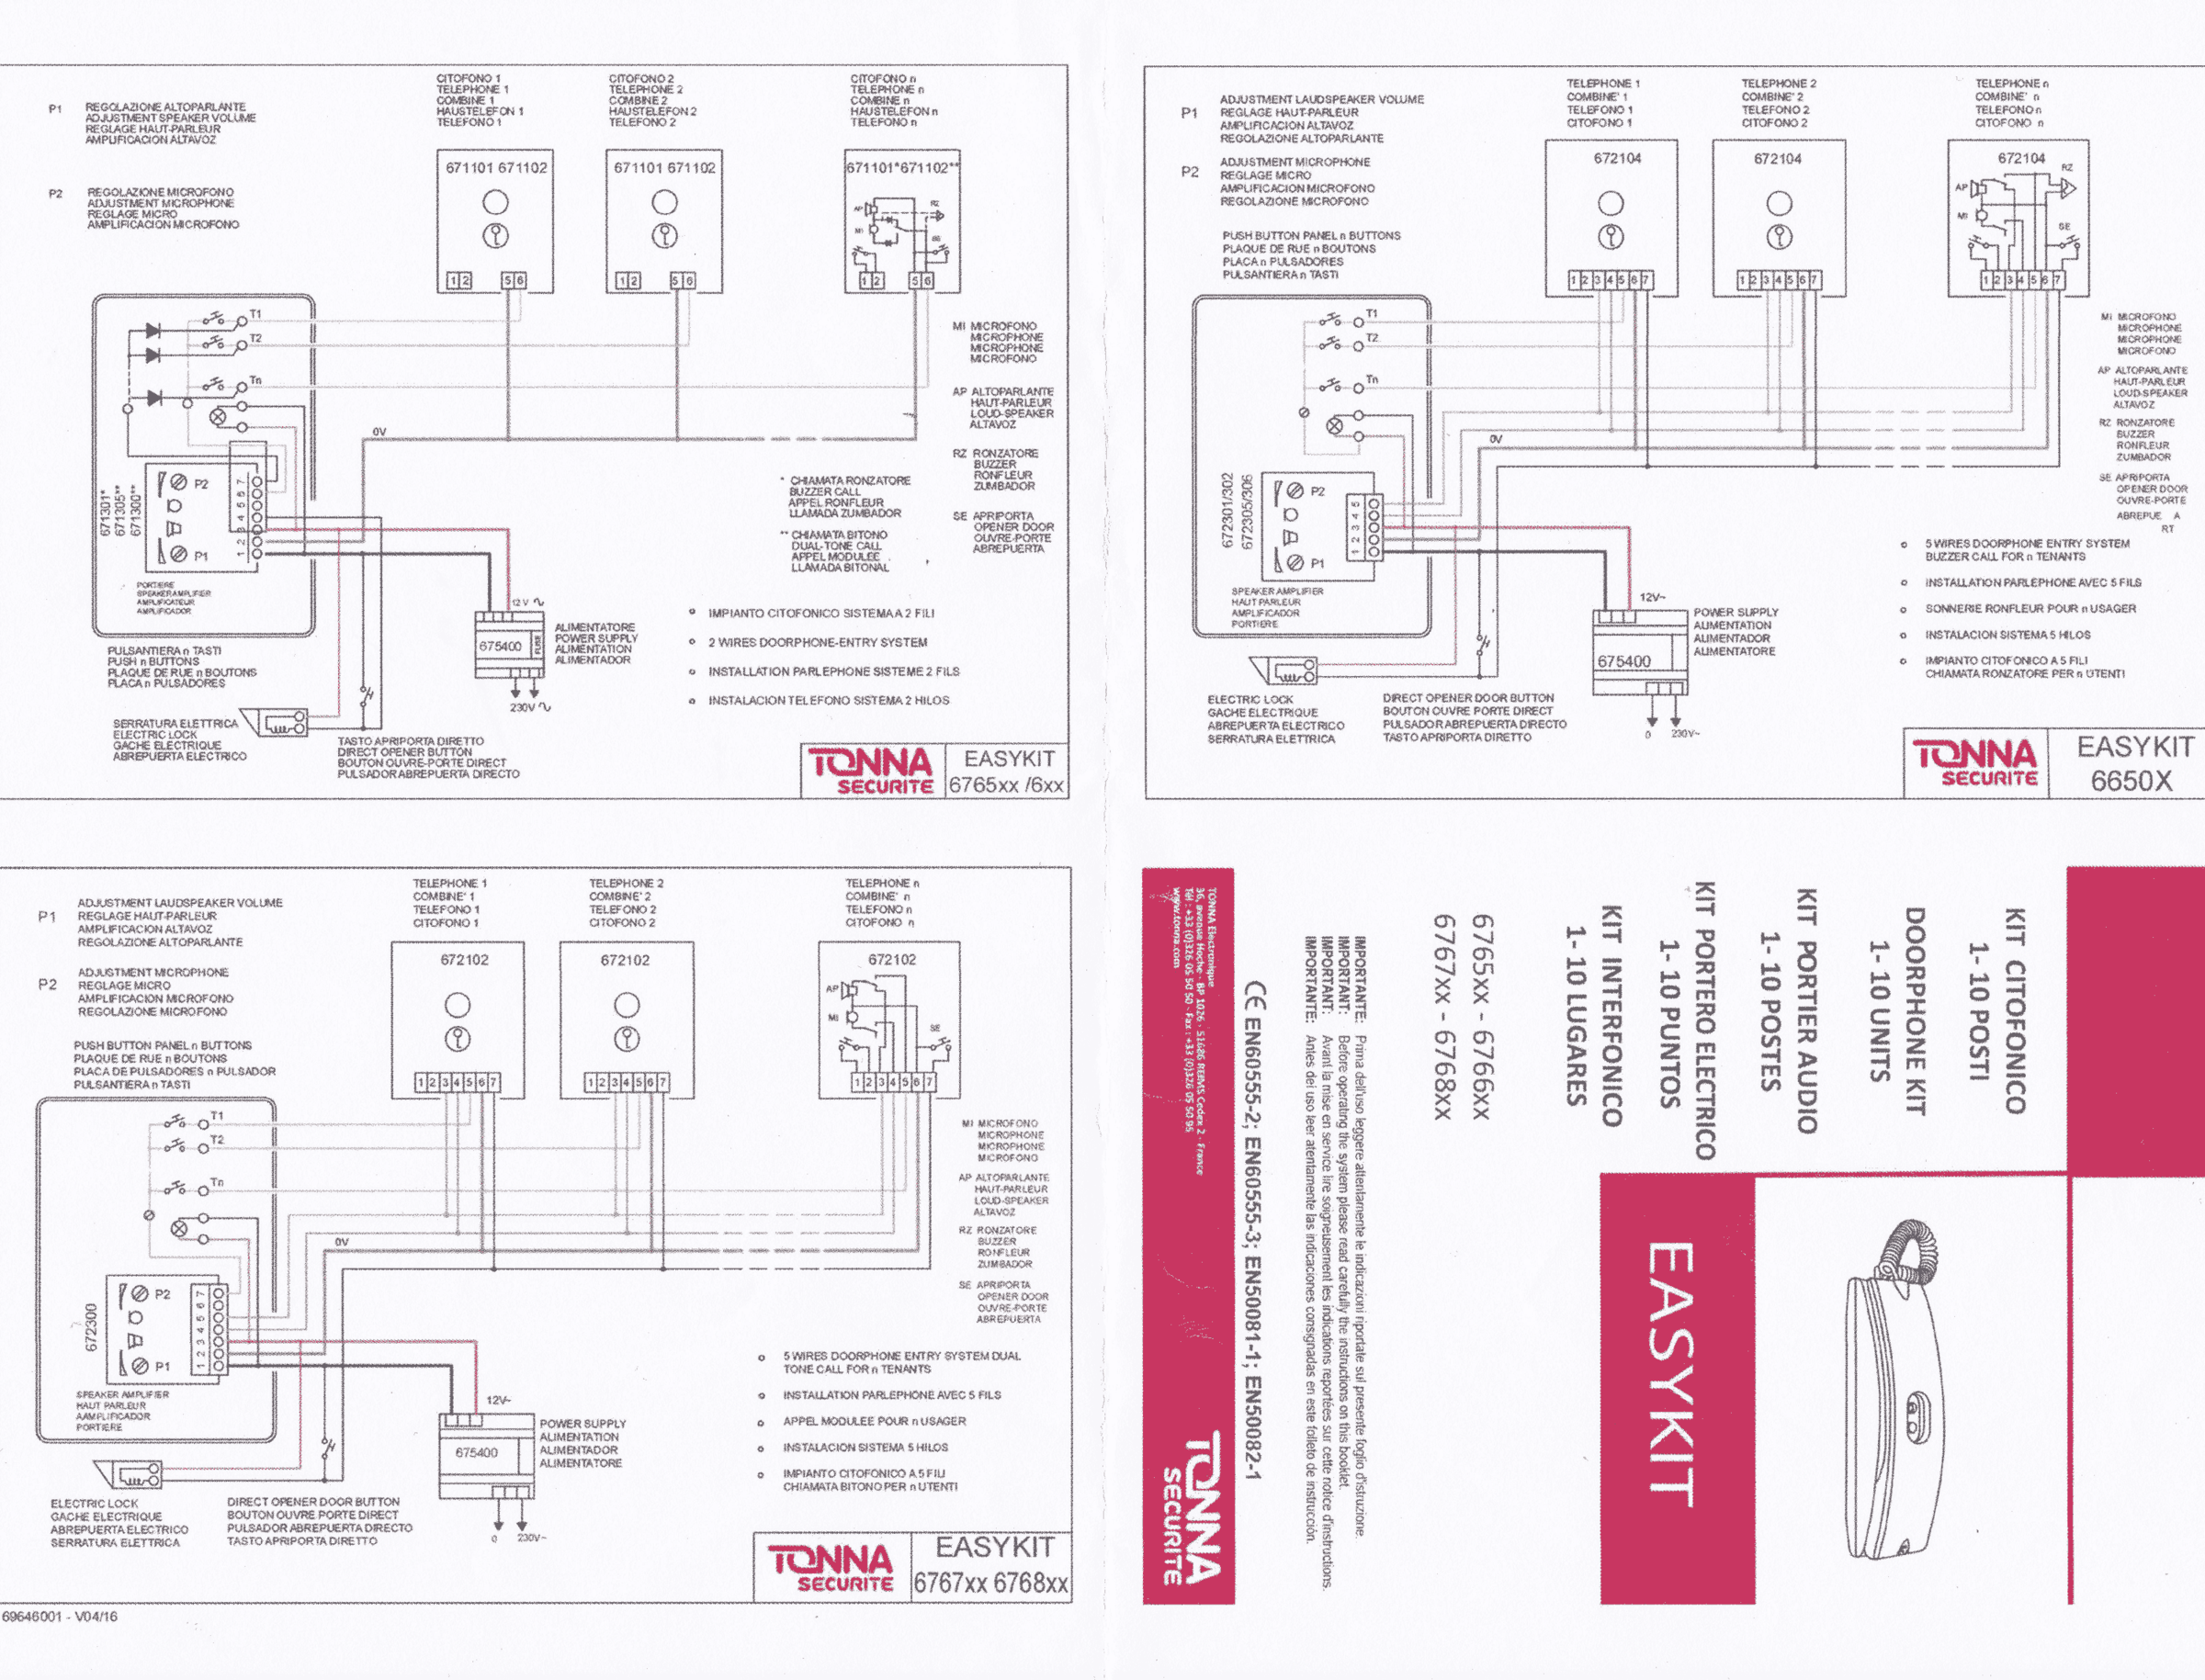 ACET-TONNA-WIRING-INSTRUCTIONS-WITH-UNIT-3-DIFFERENT-WIRING-OPTIONS-FOR-VARIOUS-WIRES